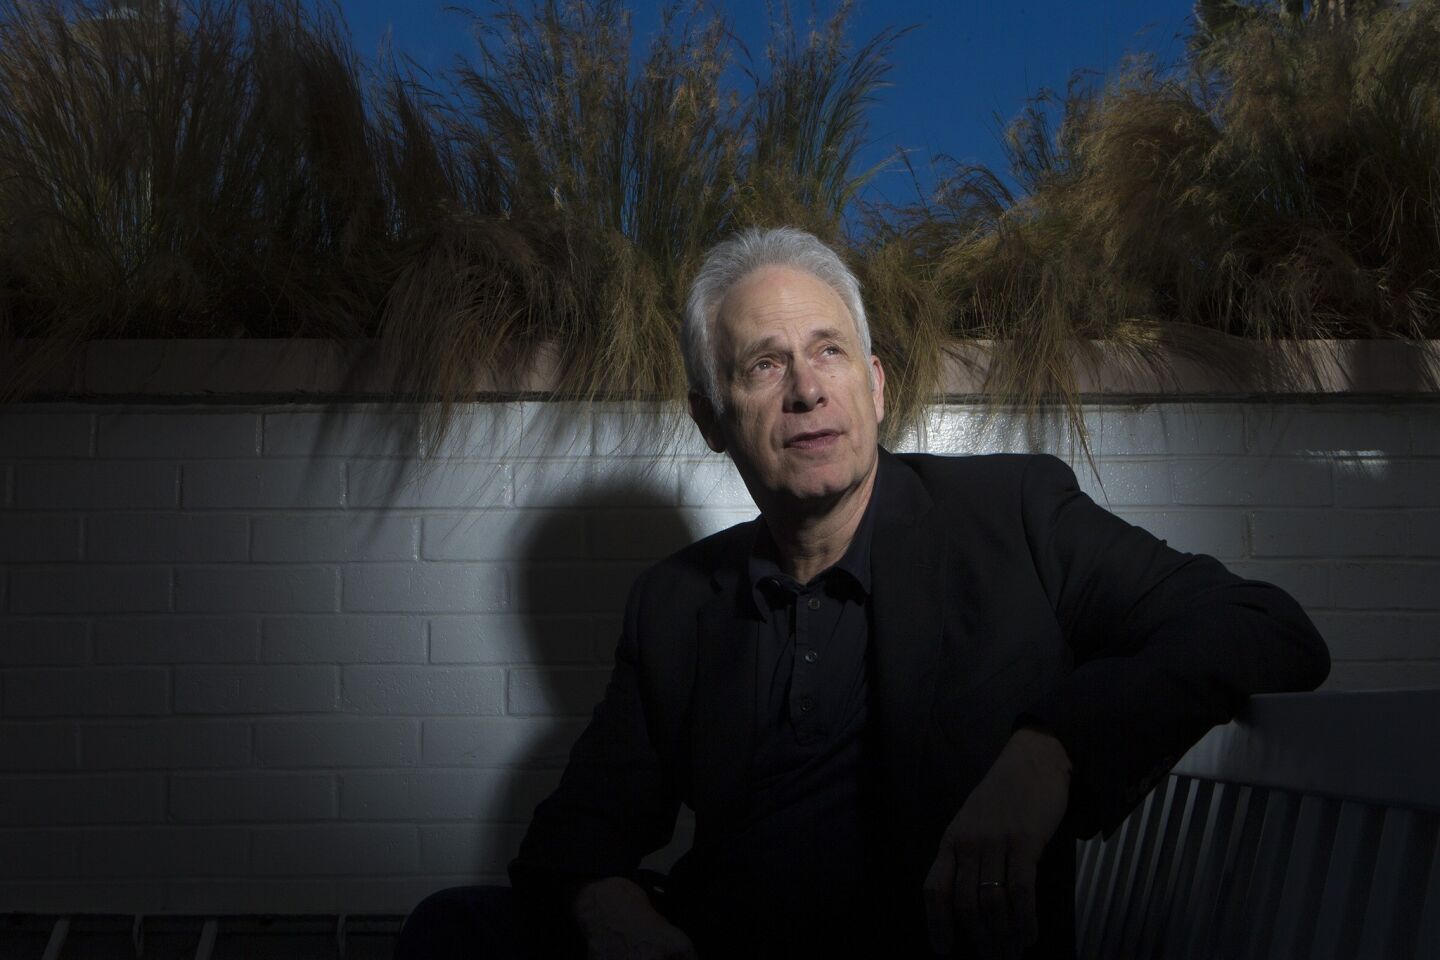 Christopher Guest created a new "mockumentary" series for HBO called "Family Tree."